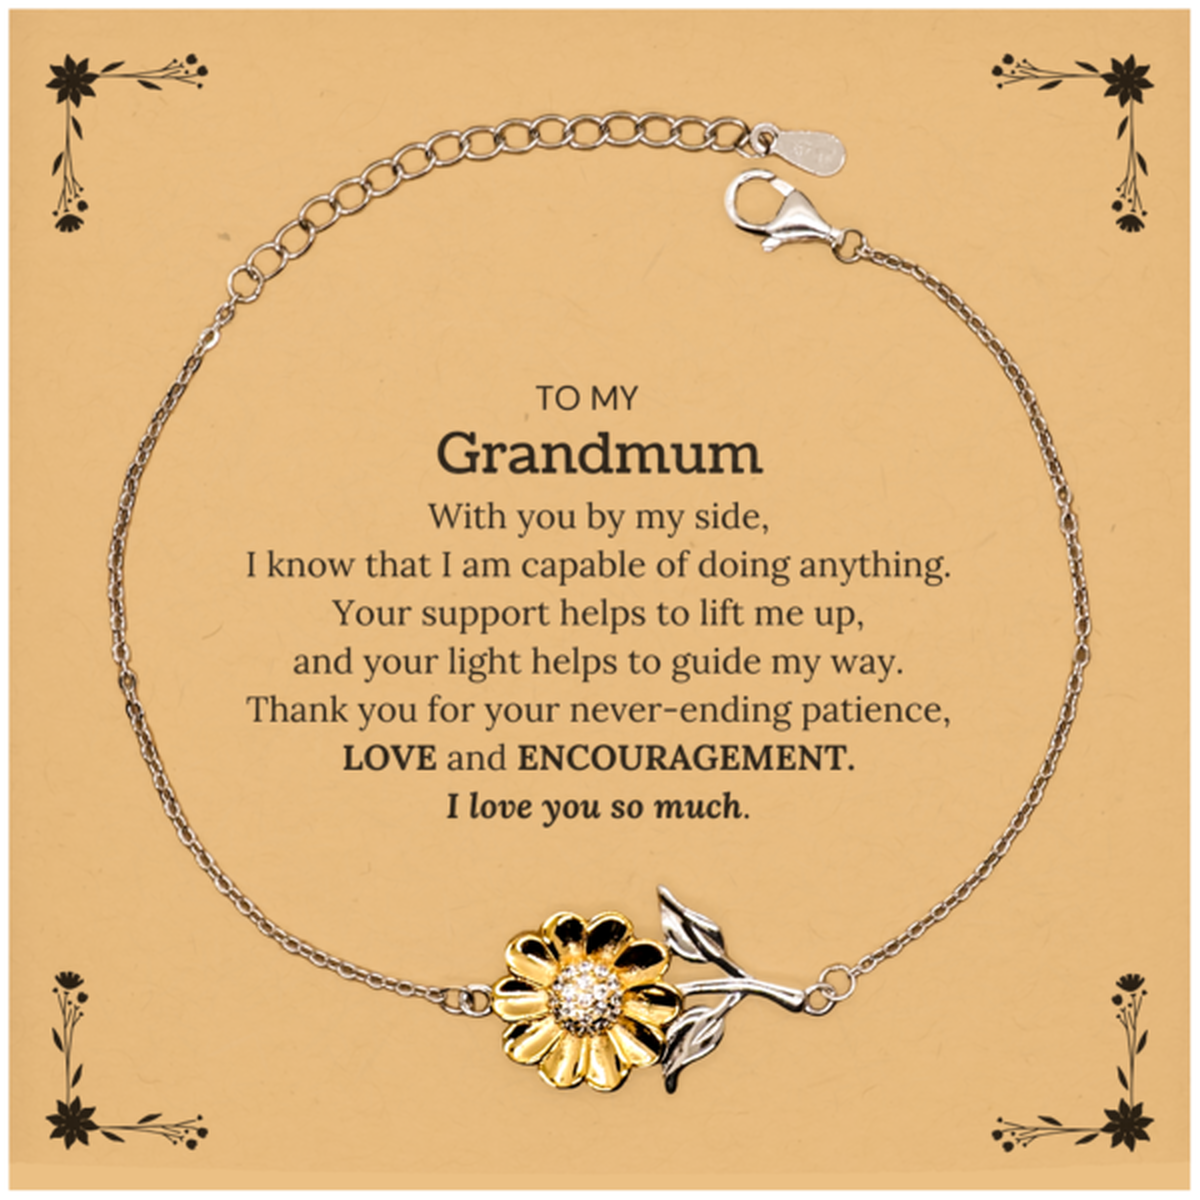 Appreciation Grandmum Sunflower Bracelet Gifts, To My Grandmum Birthday Christmas Wedding Keepsake Gifts for Grandmum With you by my side, I know that I am capable of doing anything. I love you so much